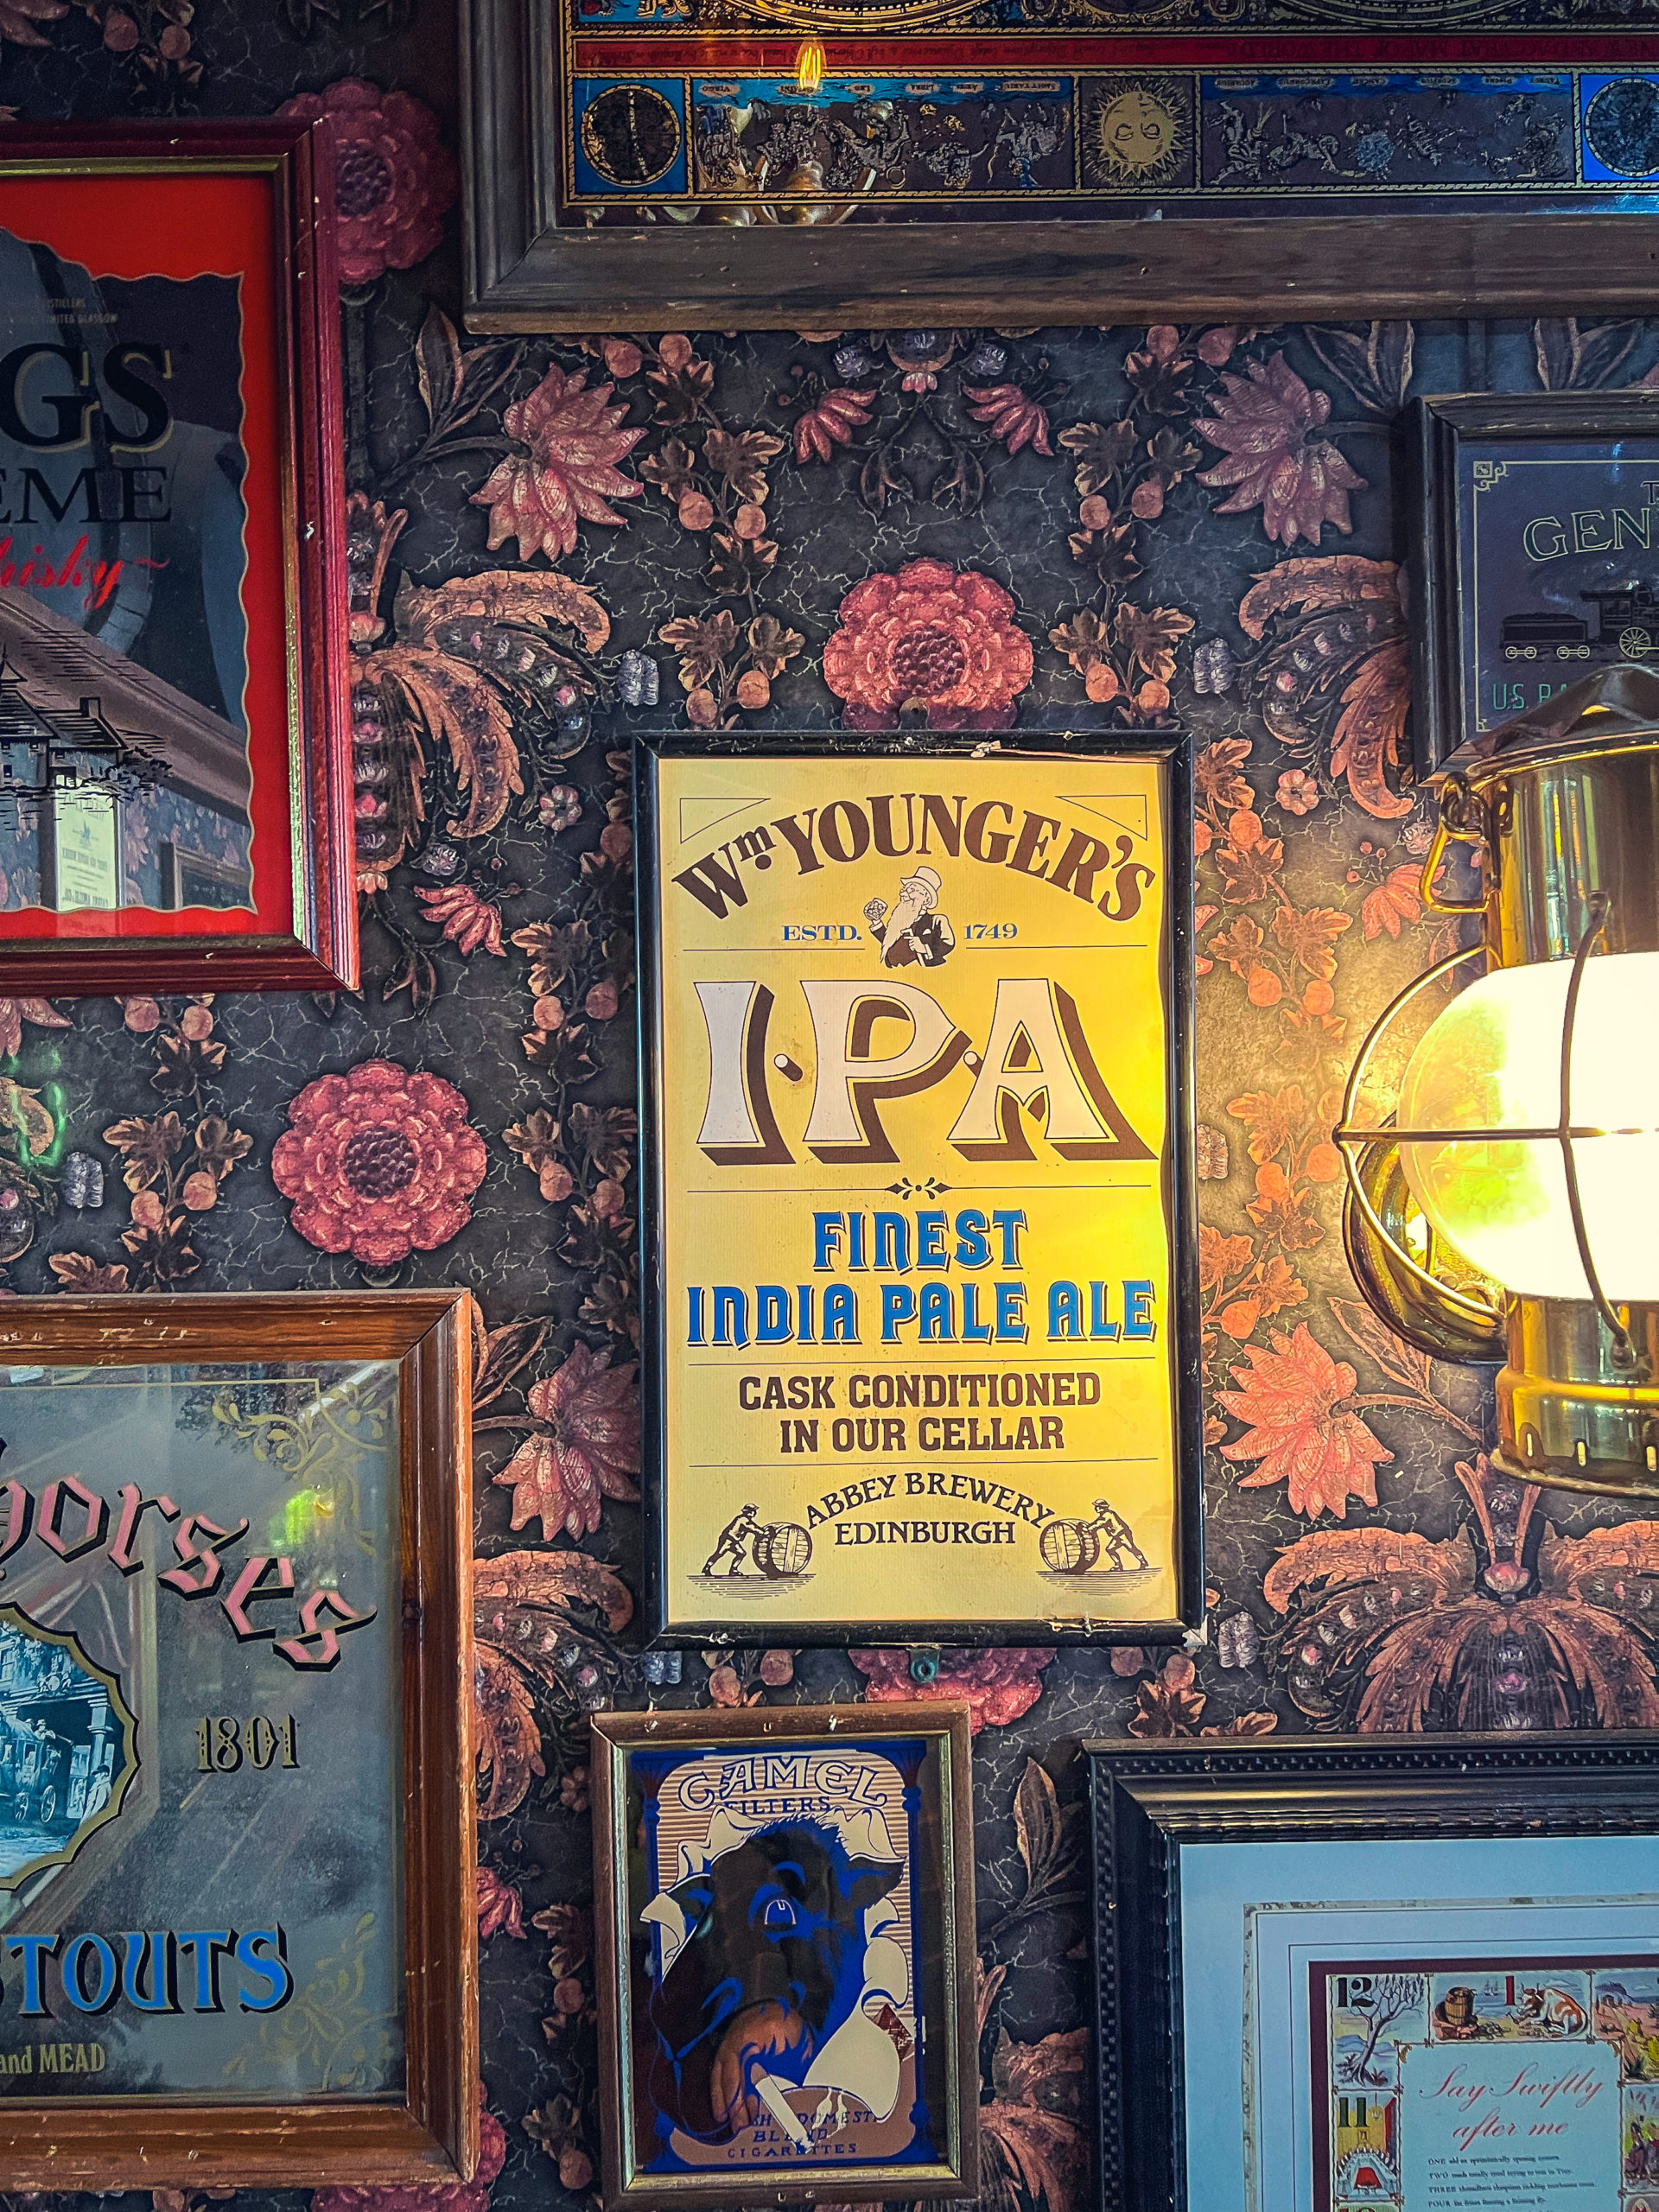 Remembering The Lost Younger’s Brewery in Edinburgh 